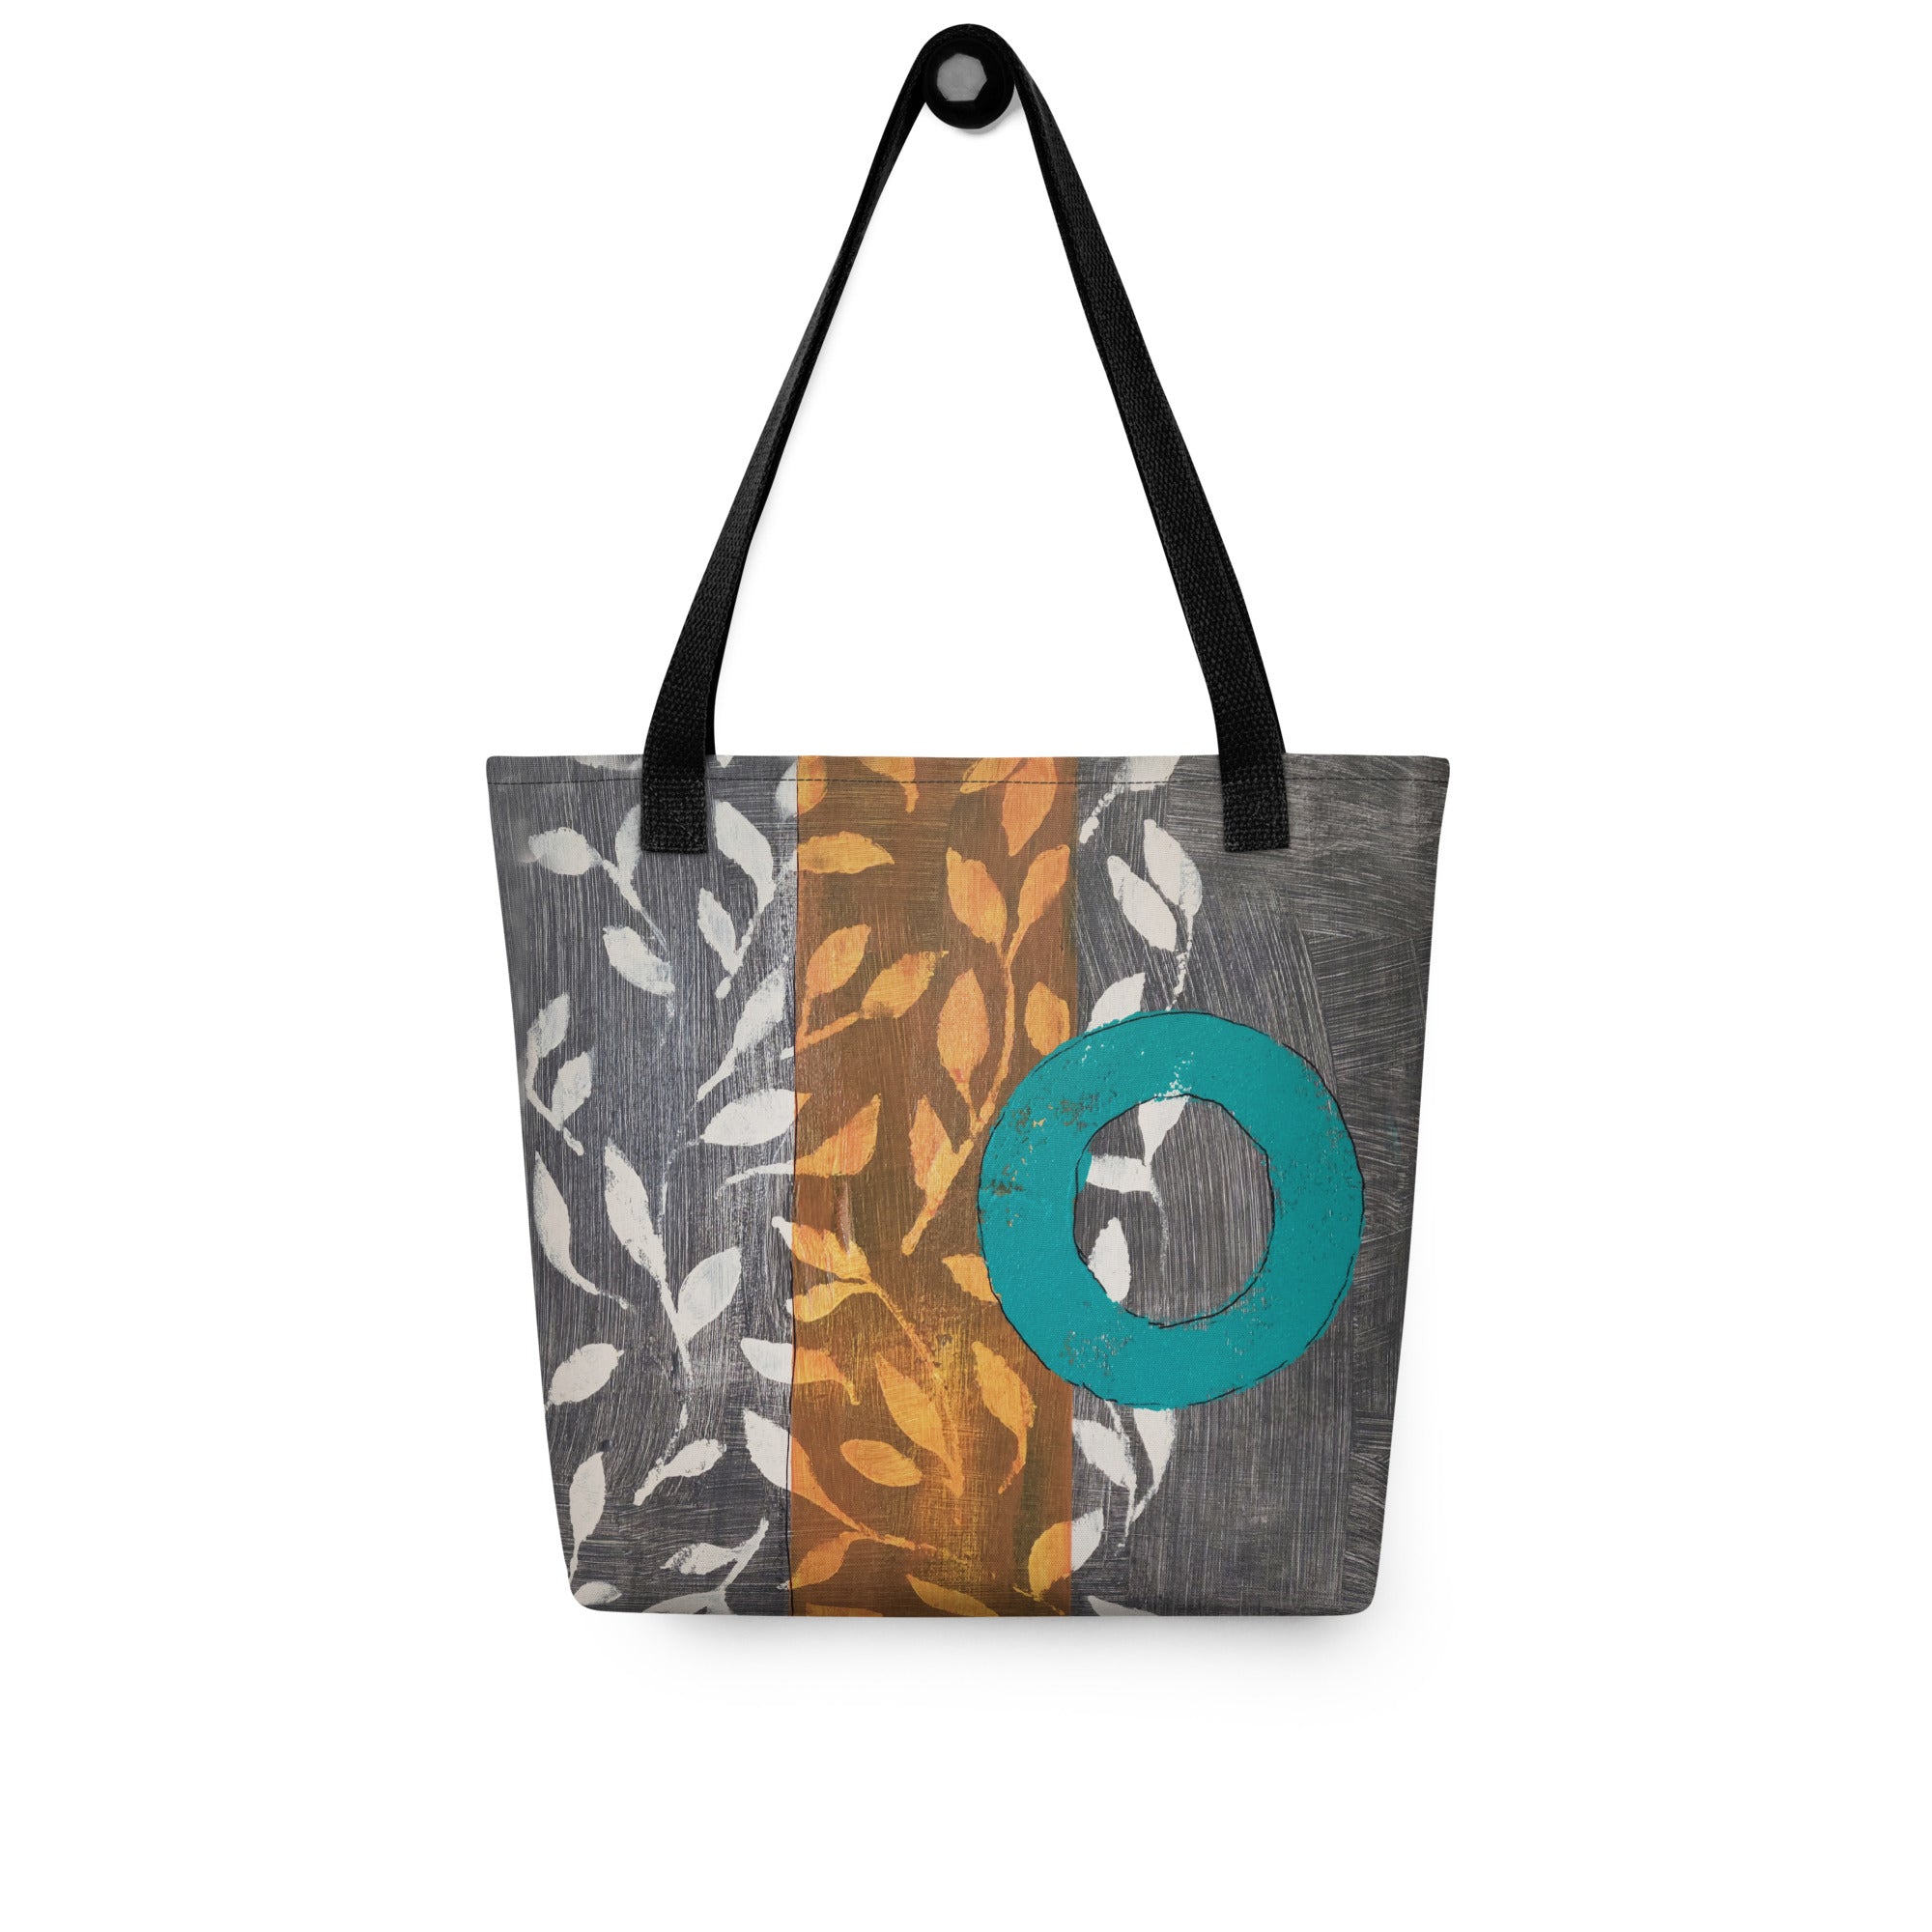 Tote bag of original art.  Turquoise circle on gray and light burnt orange background with off-white leaf design.